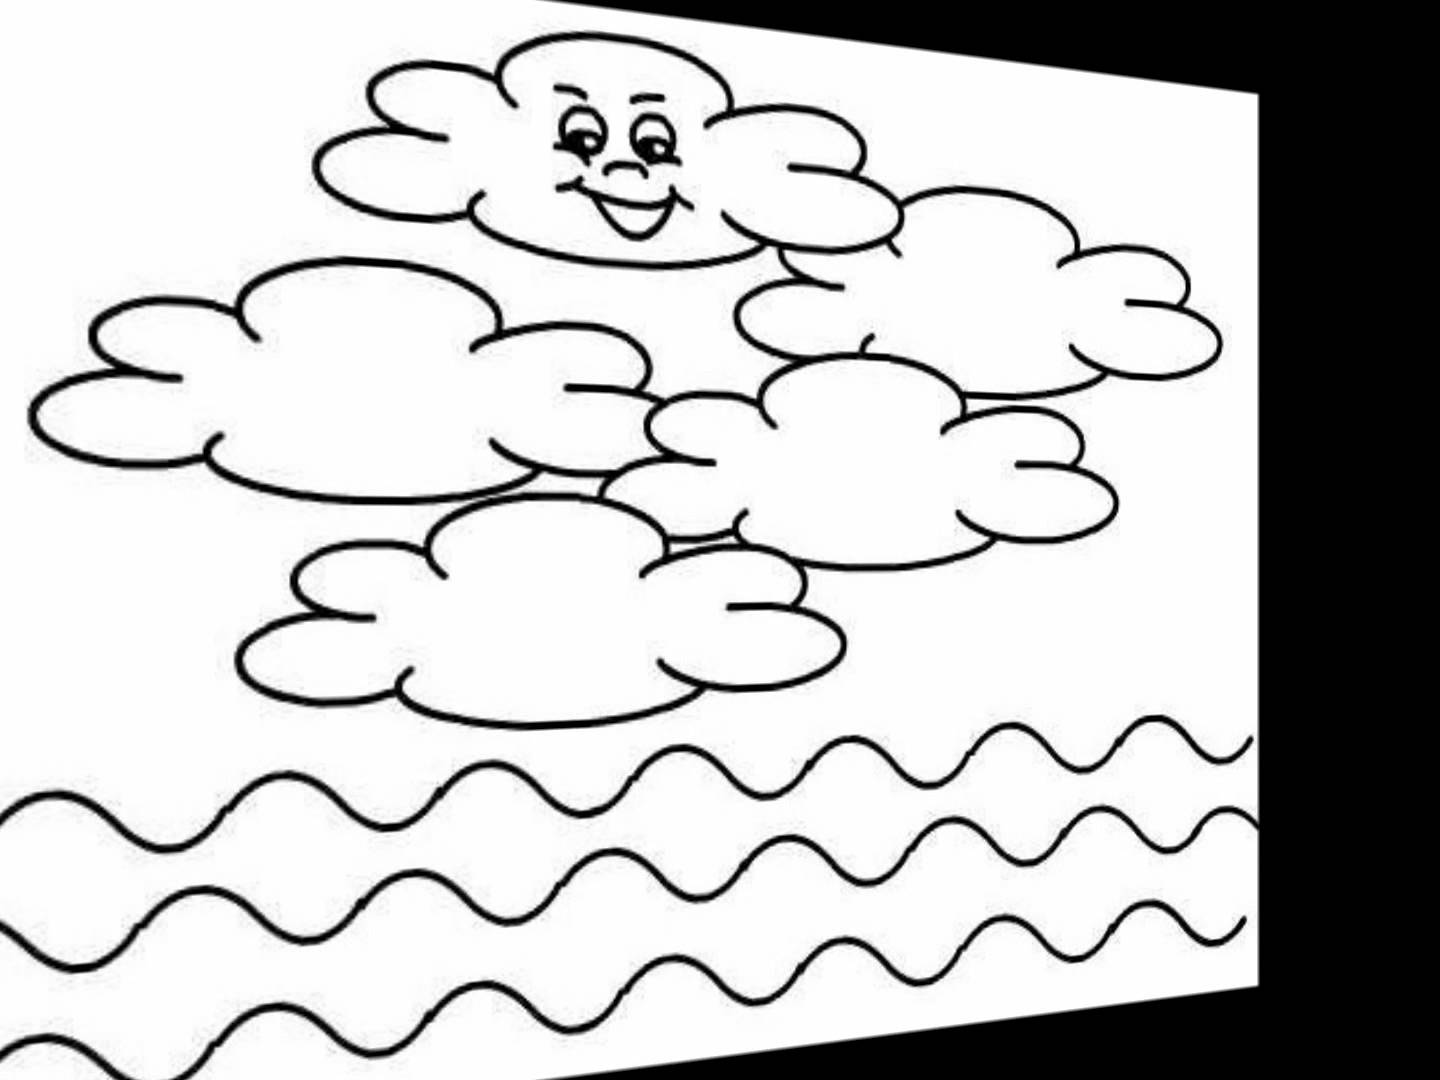 Creation Bible Story Coloring Pages - YouTube